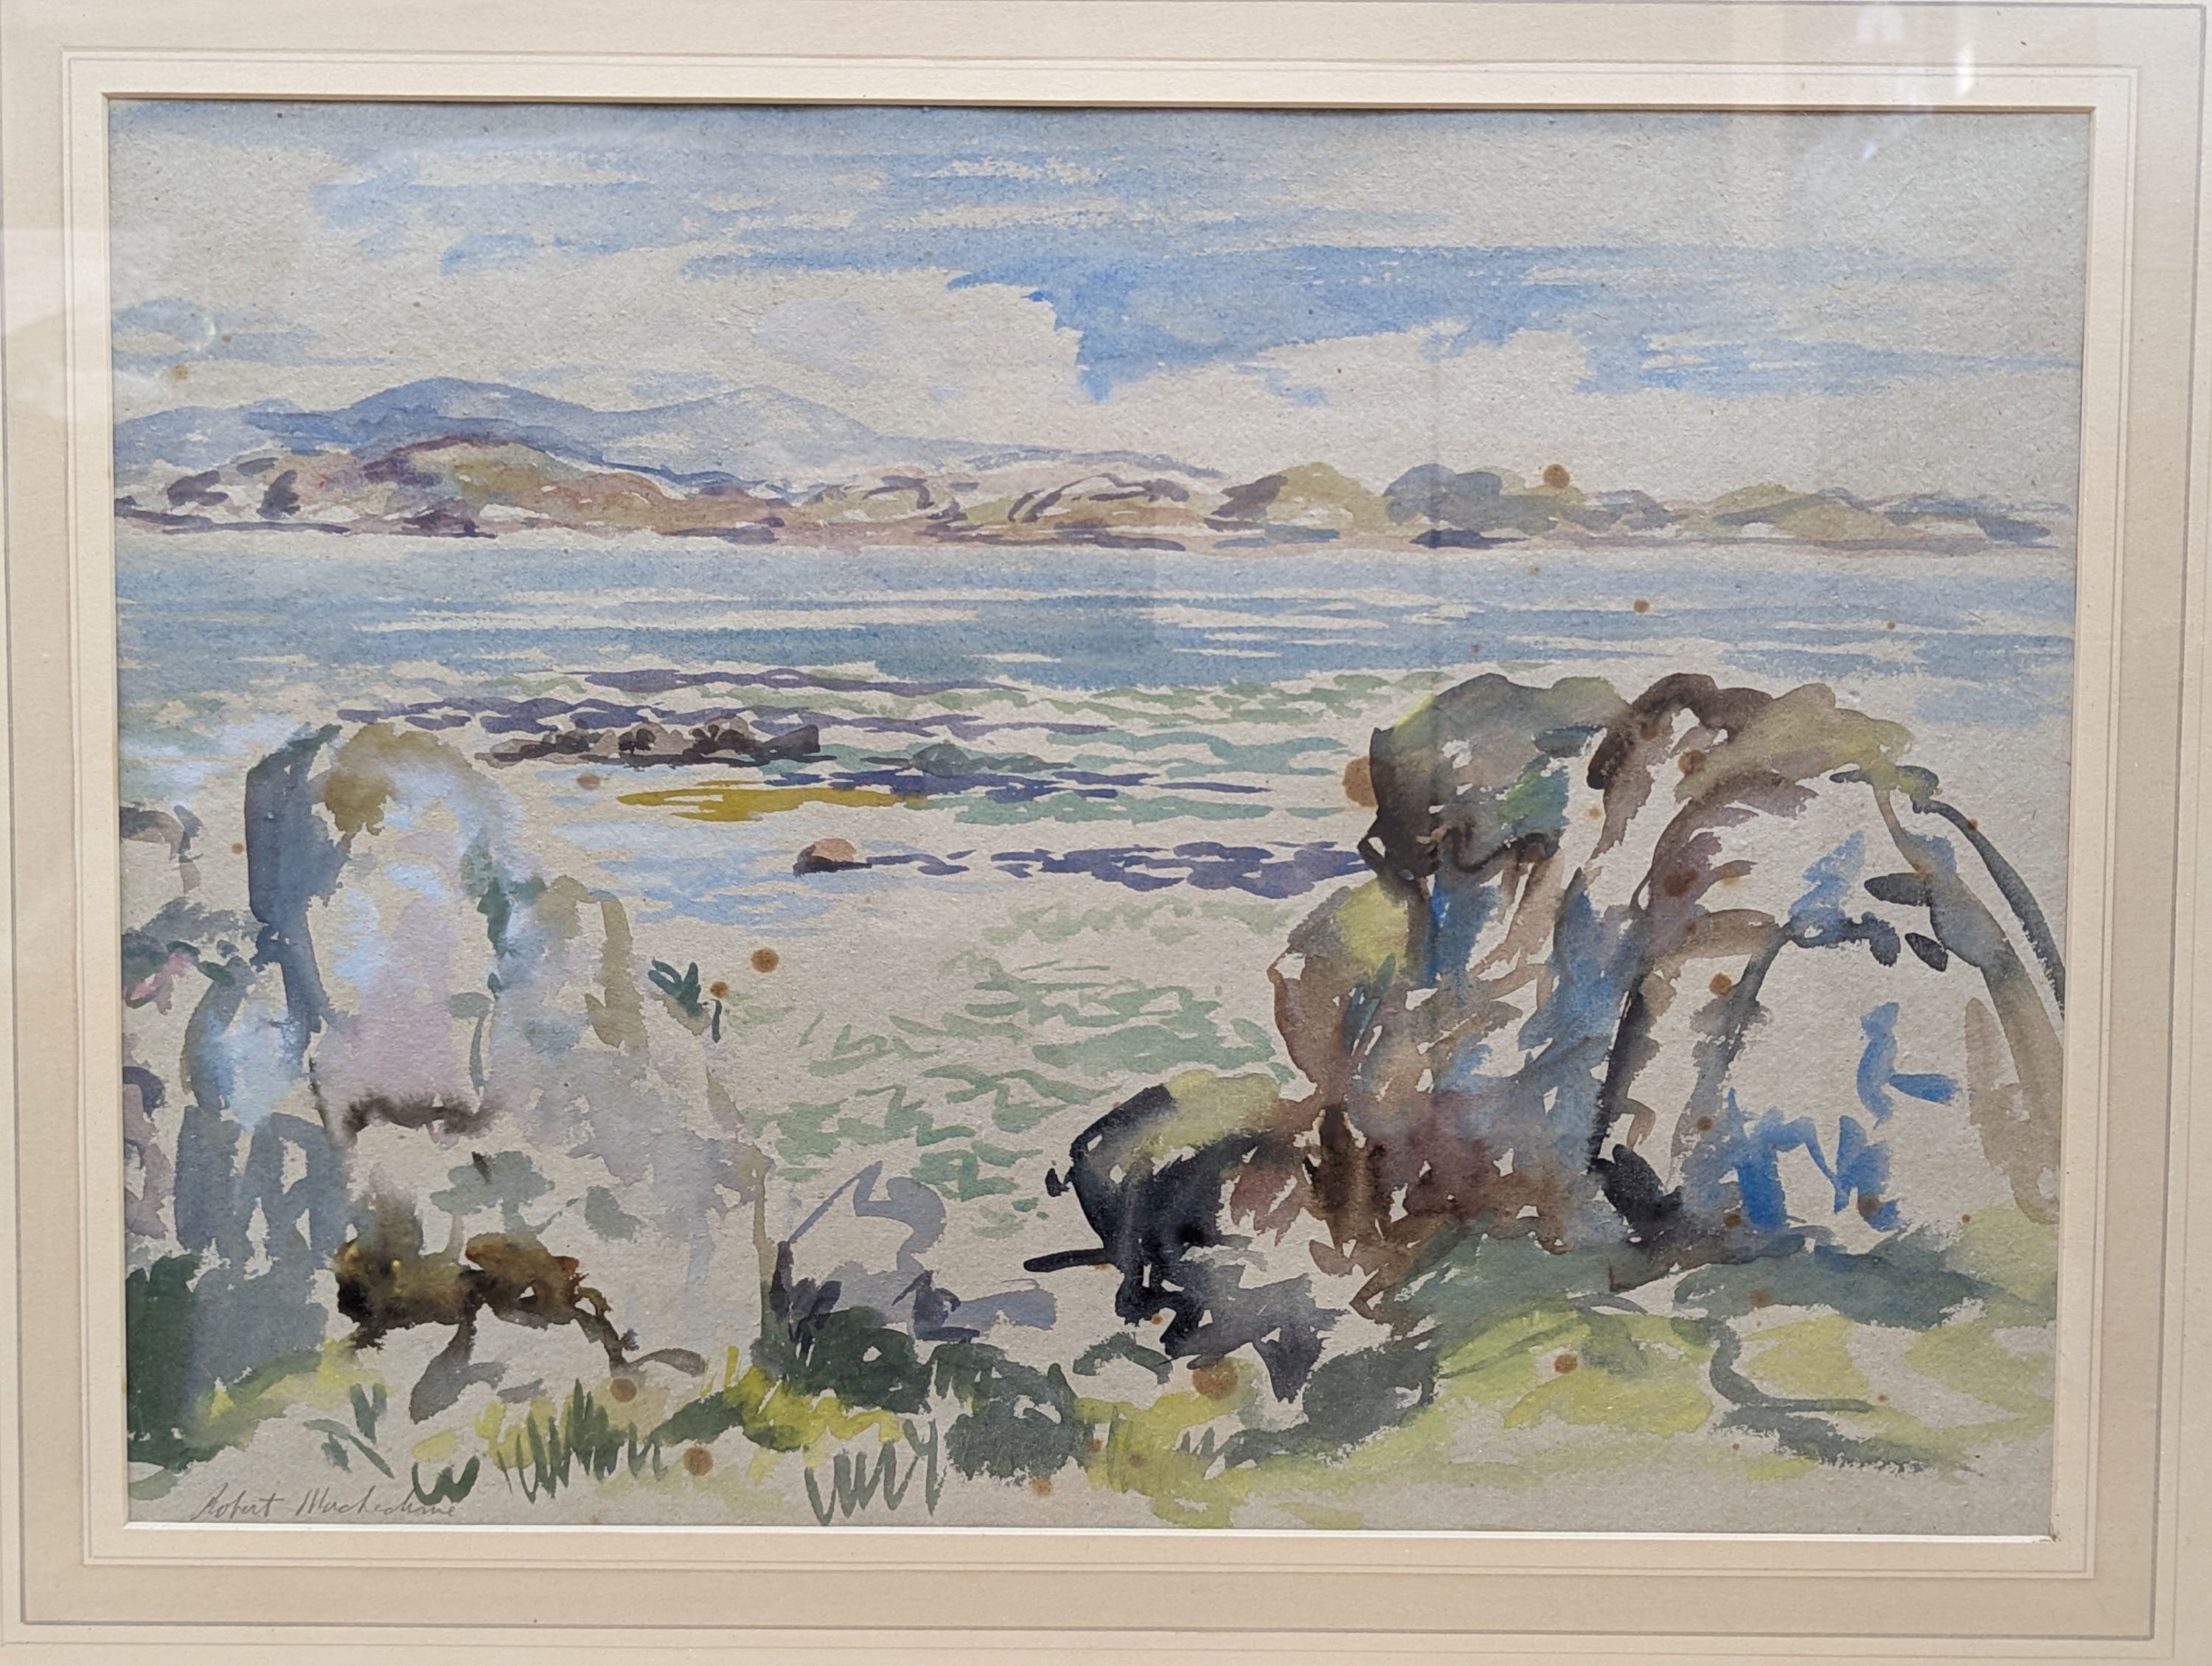 Robert Mackechnie, R.B.A. (1894-1975), two watercolours, 'In the Mountains' and 'Shore scene, Iona', signed with labels verso, 33 x 45cm